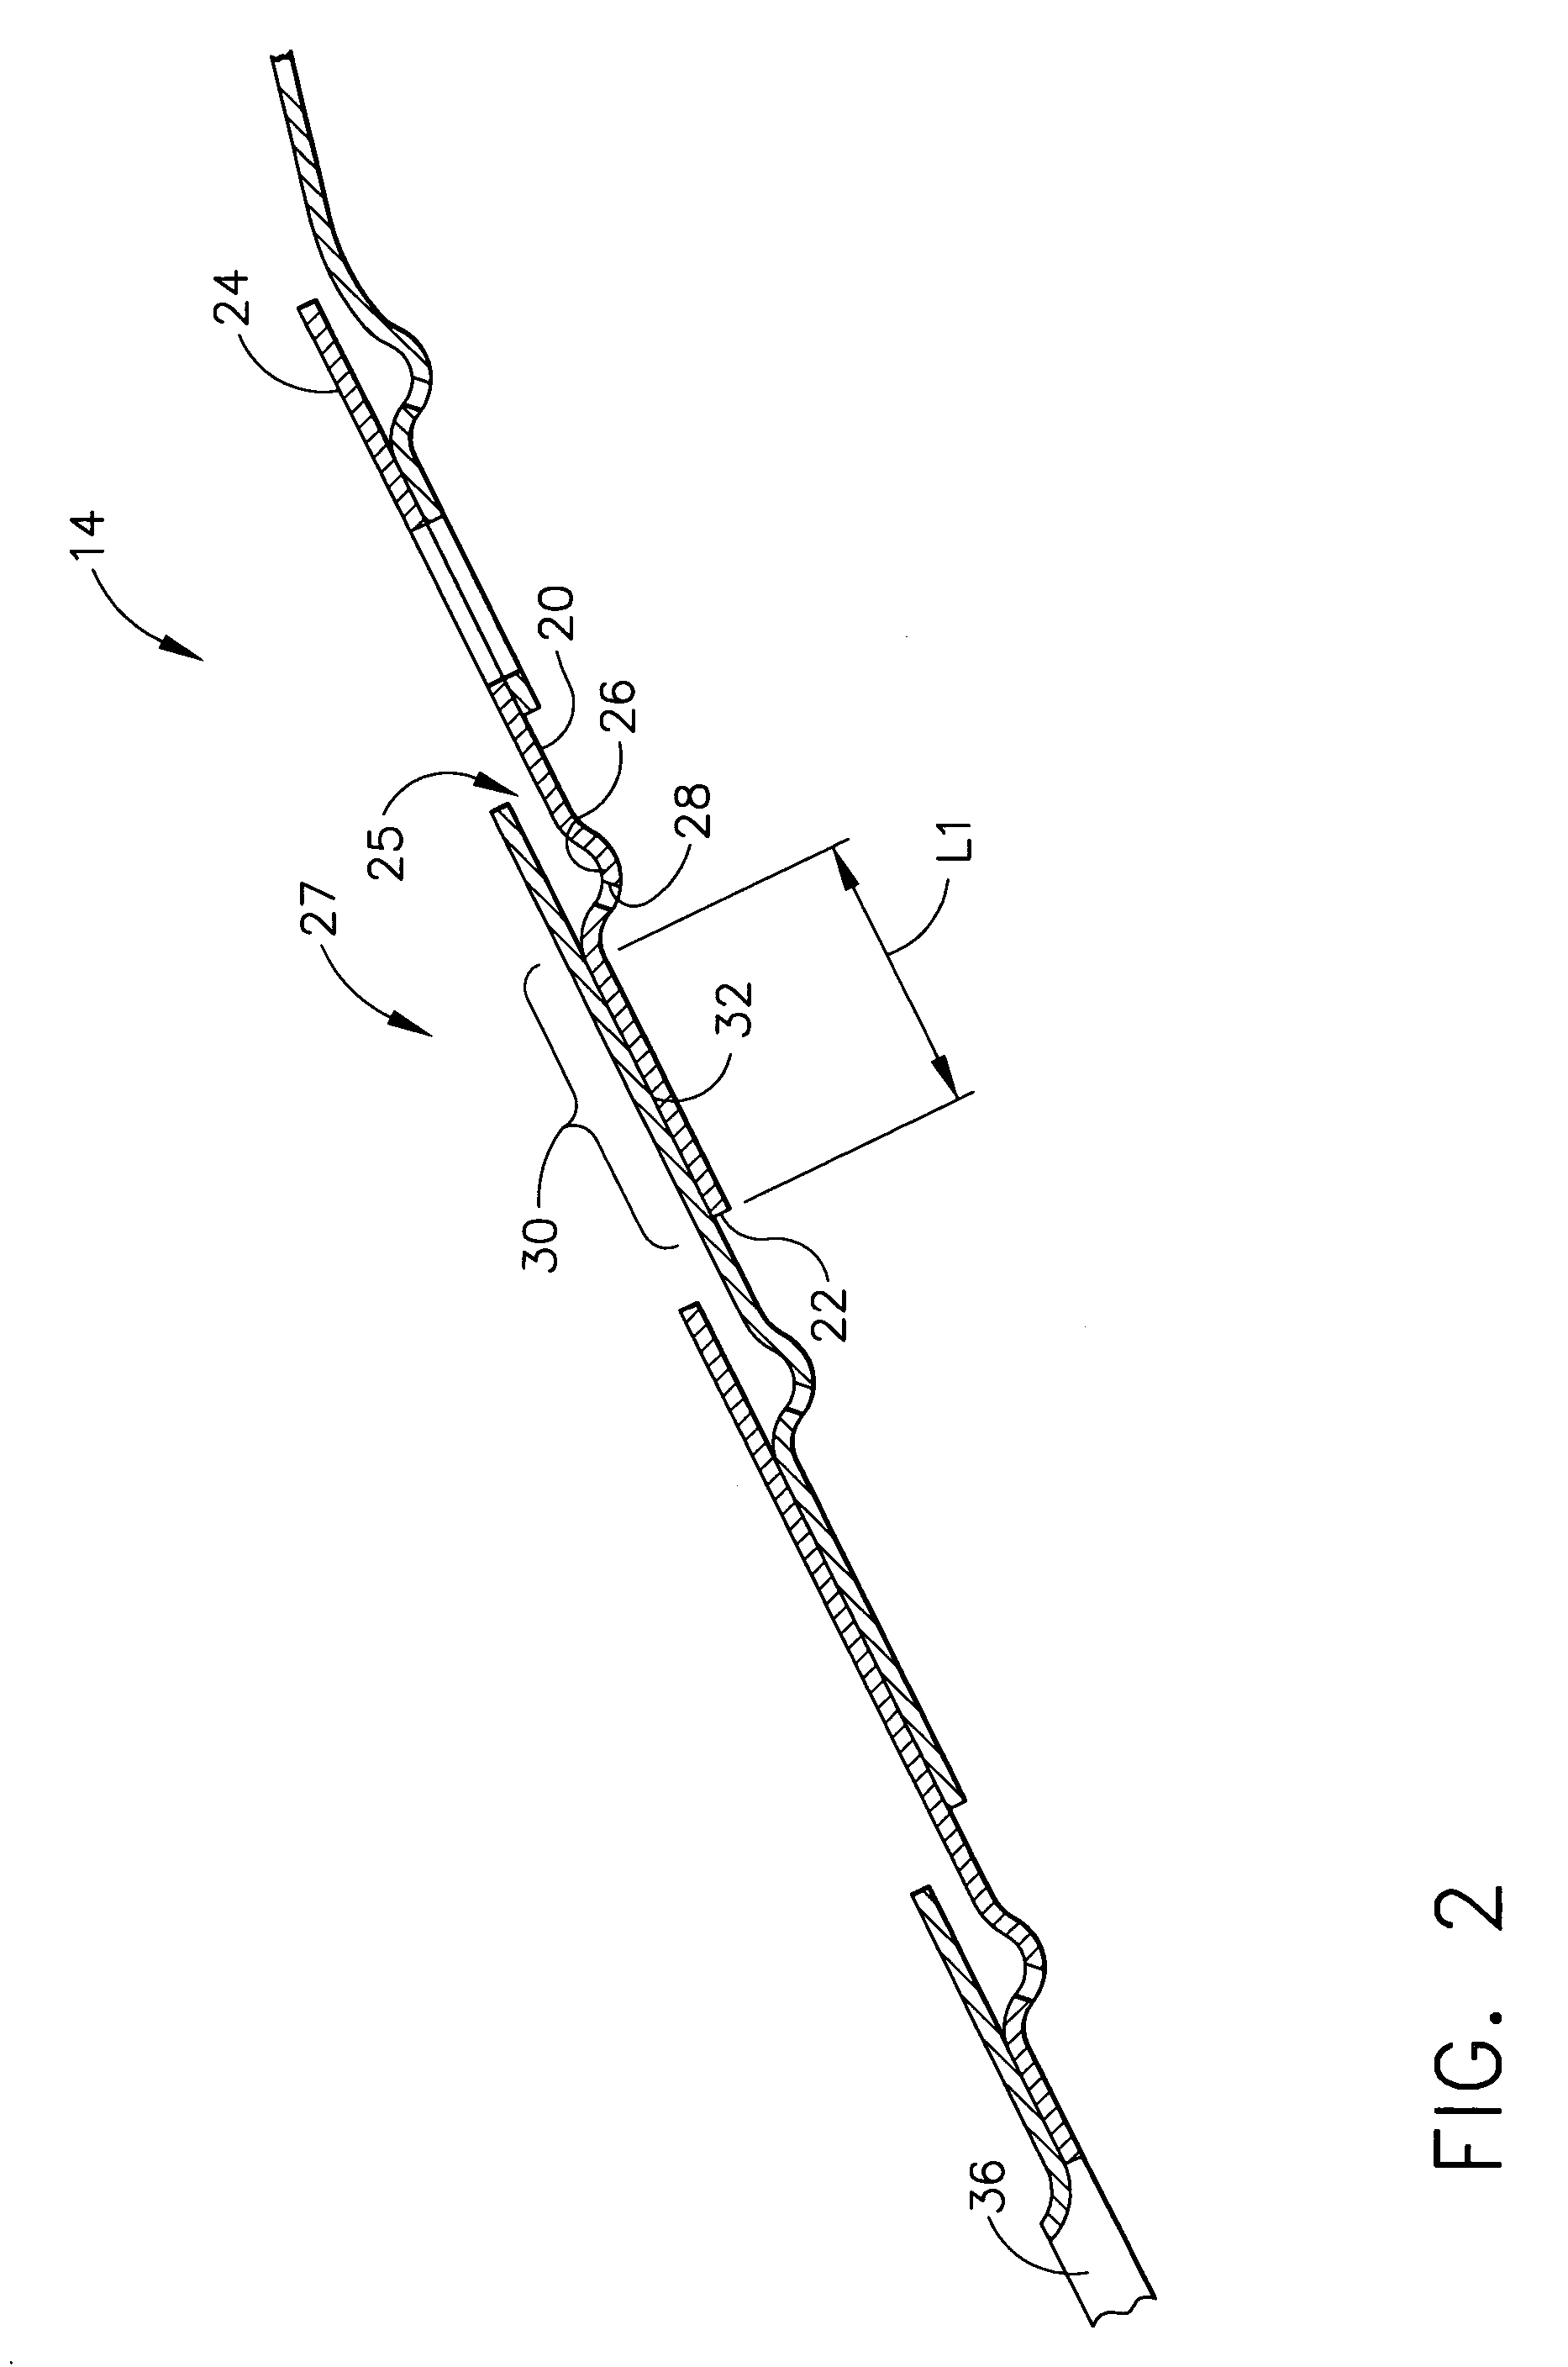 Combustor linear and method for making thereof